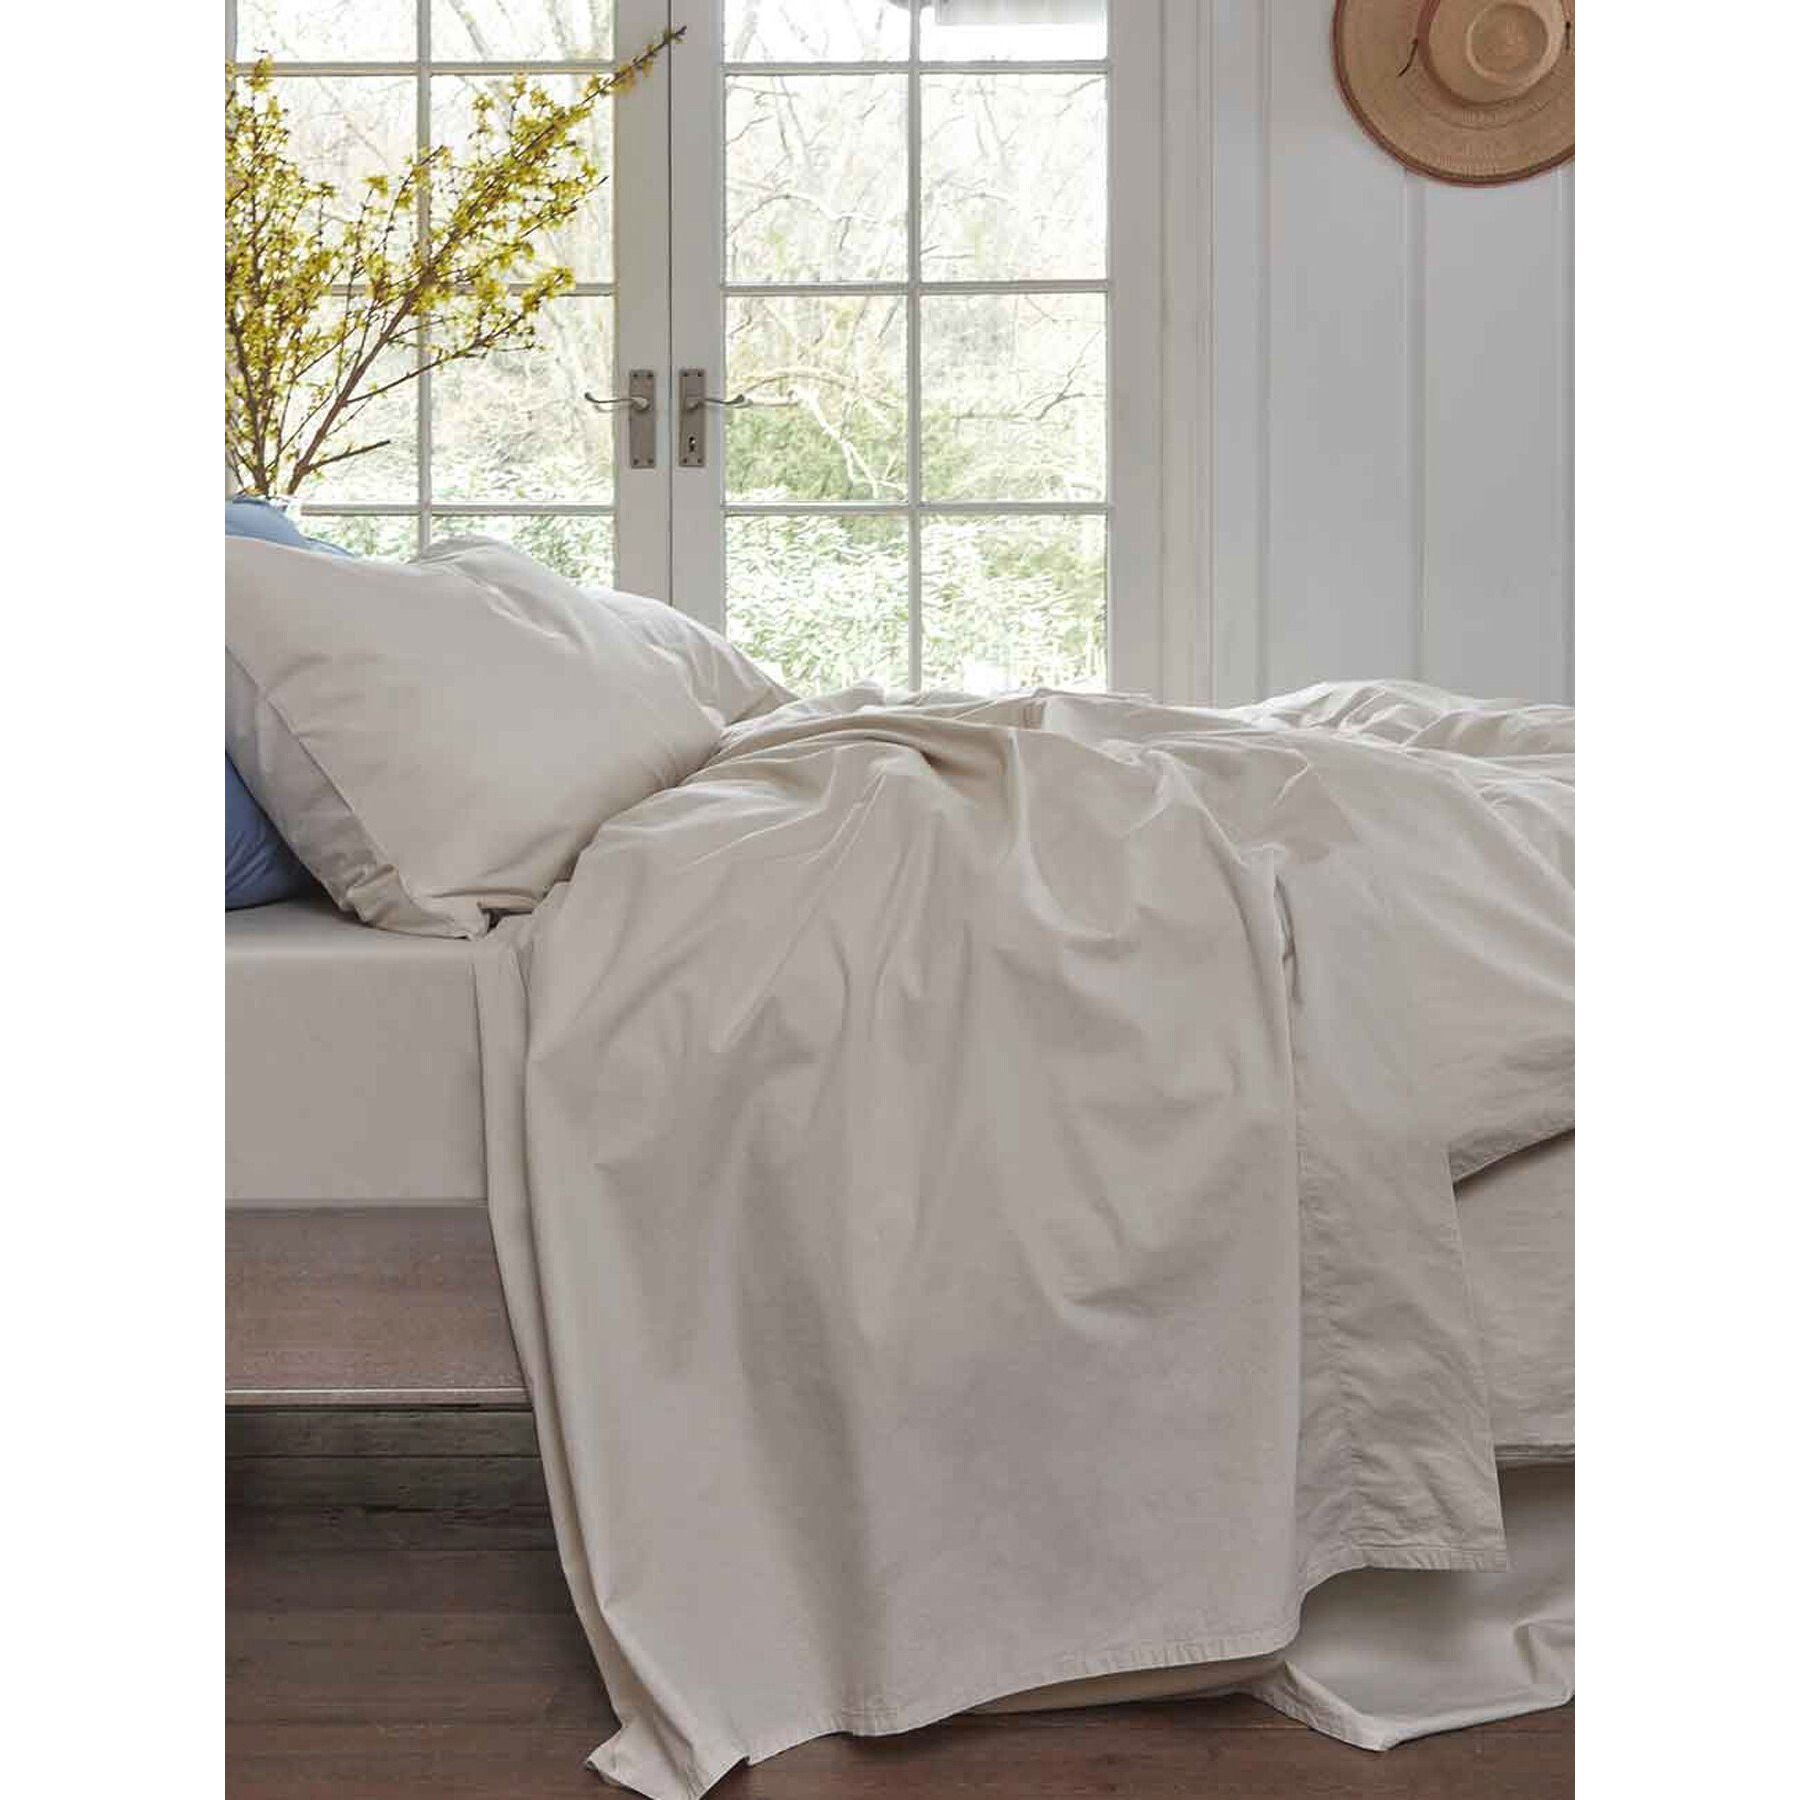 Piglet in Bed Plain Cotton Fitted Sheet - Size Single Neutral - image 1